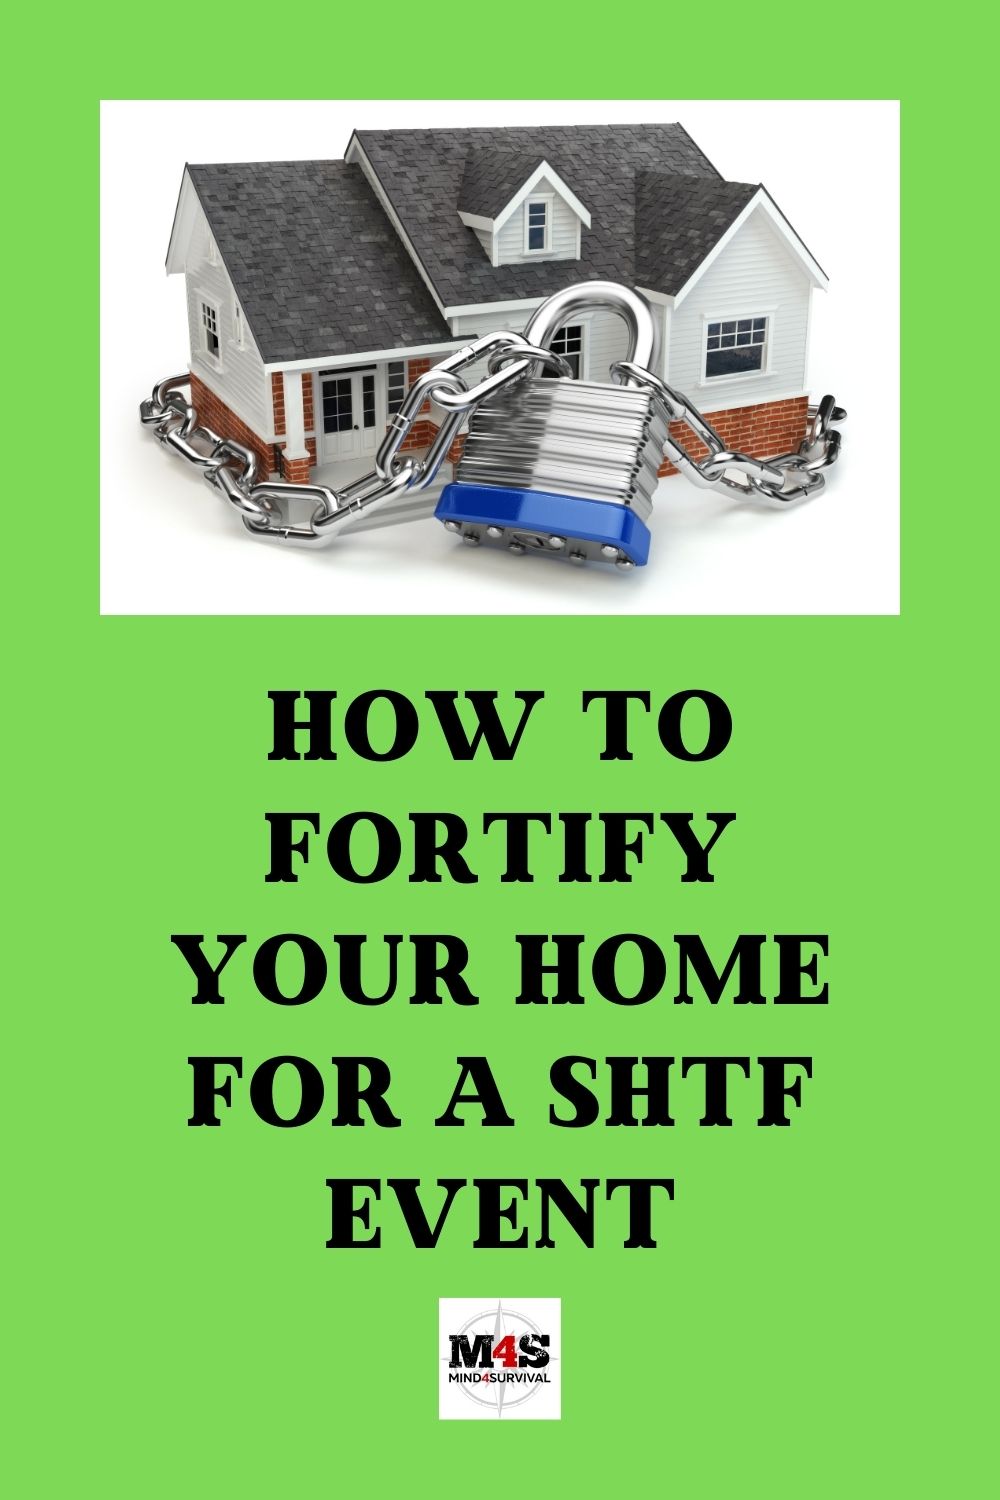 How to Fortify Your Home Against an SHTF Event